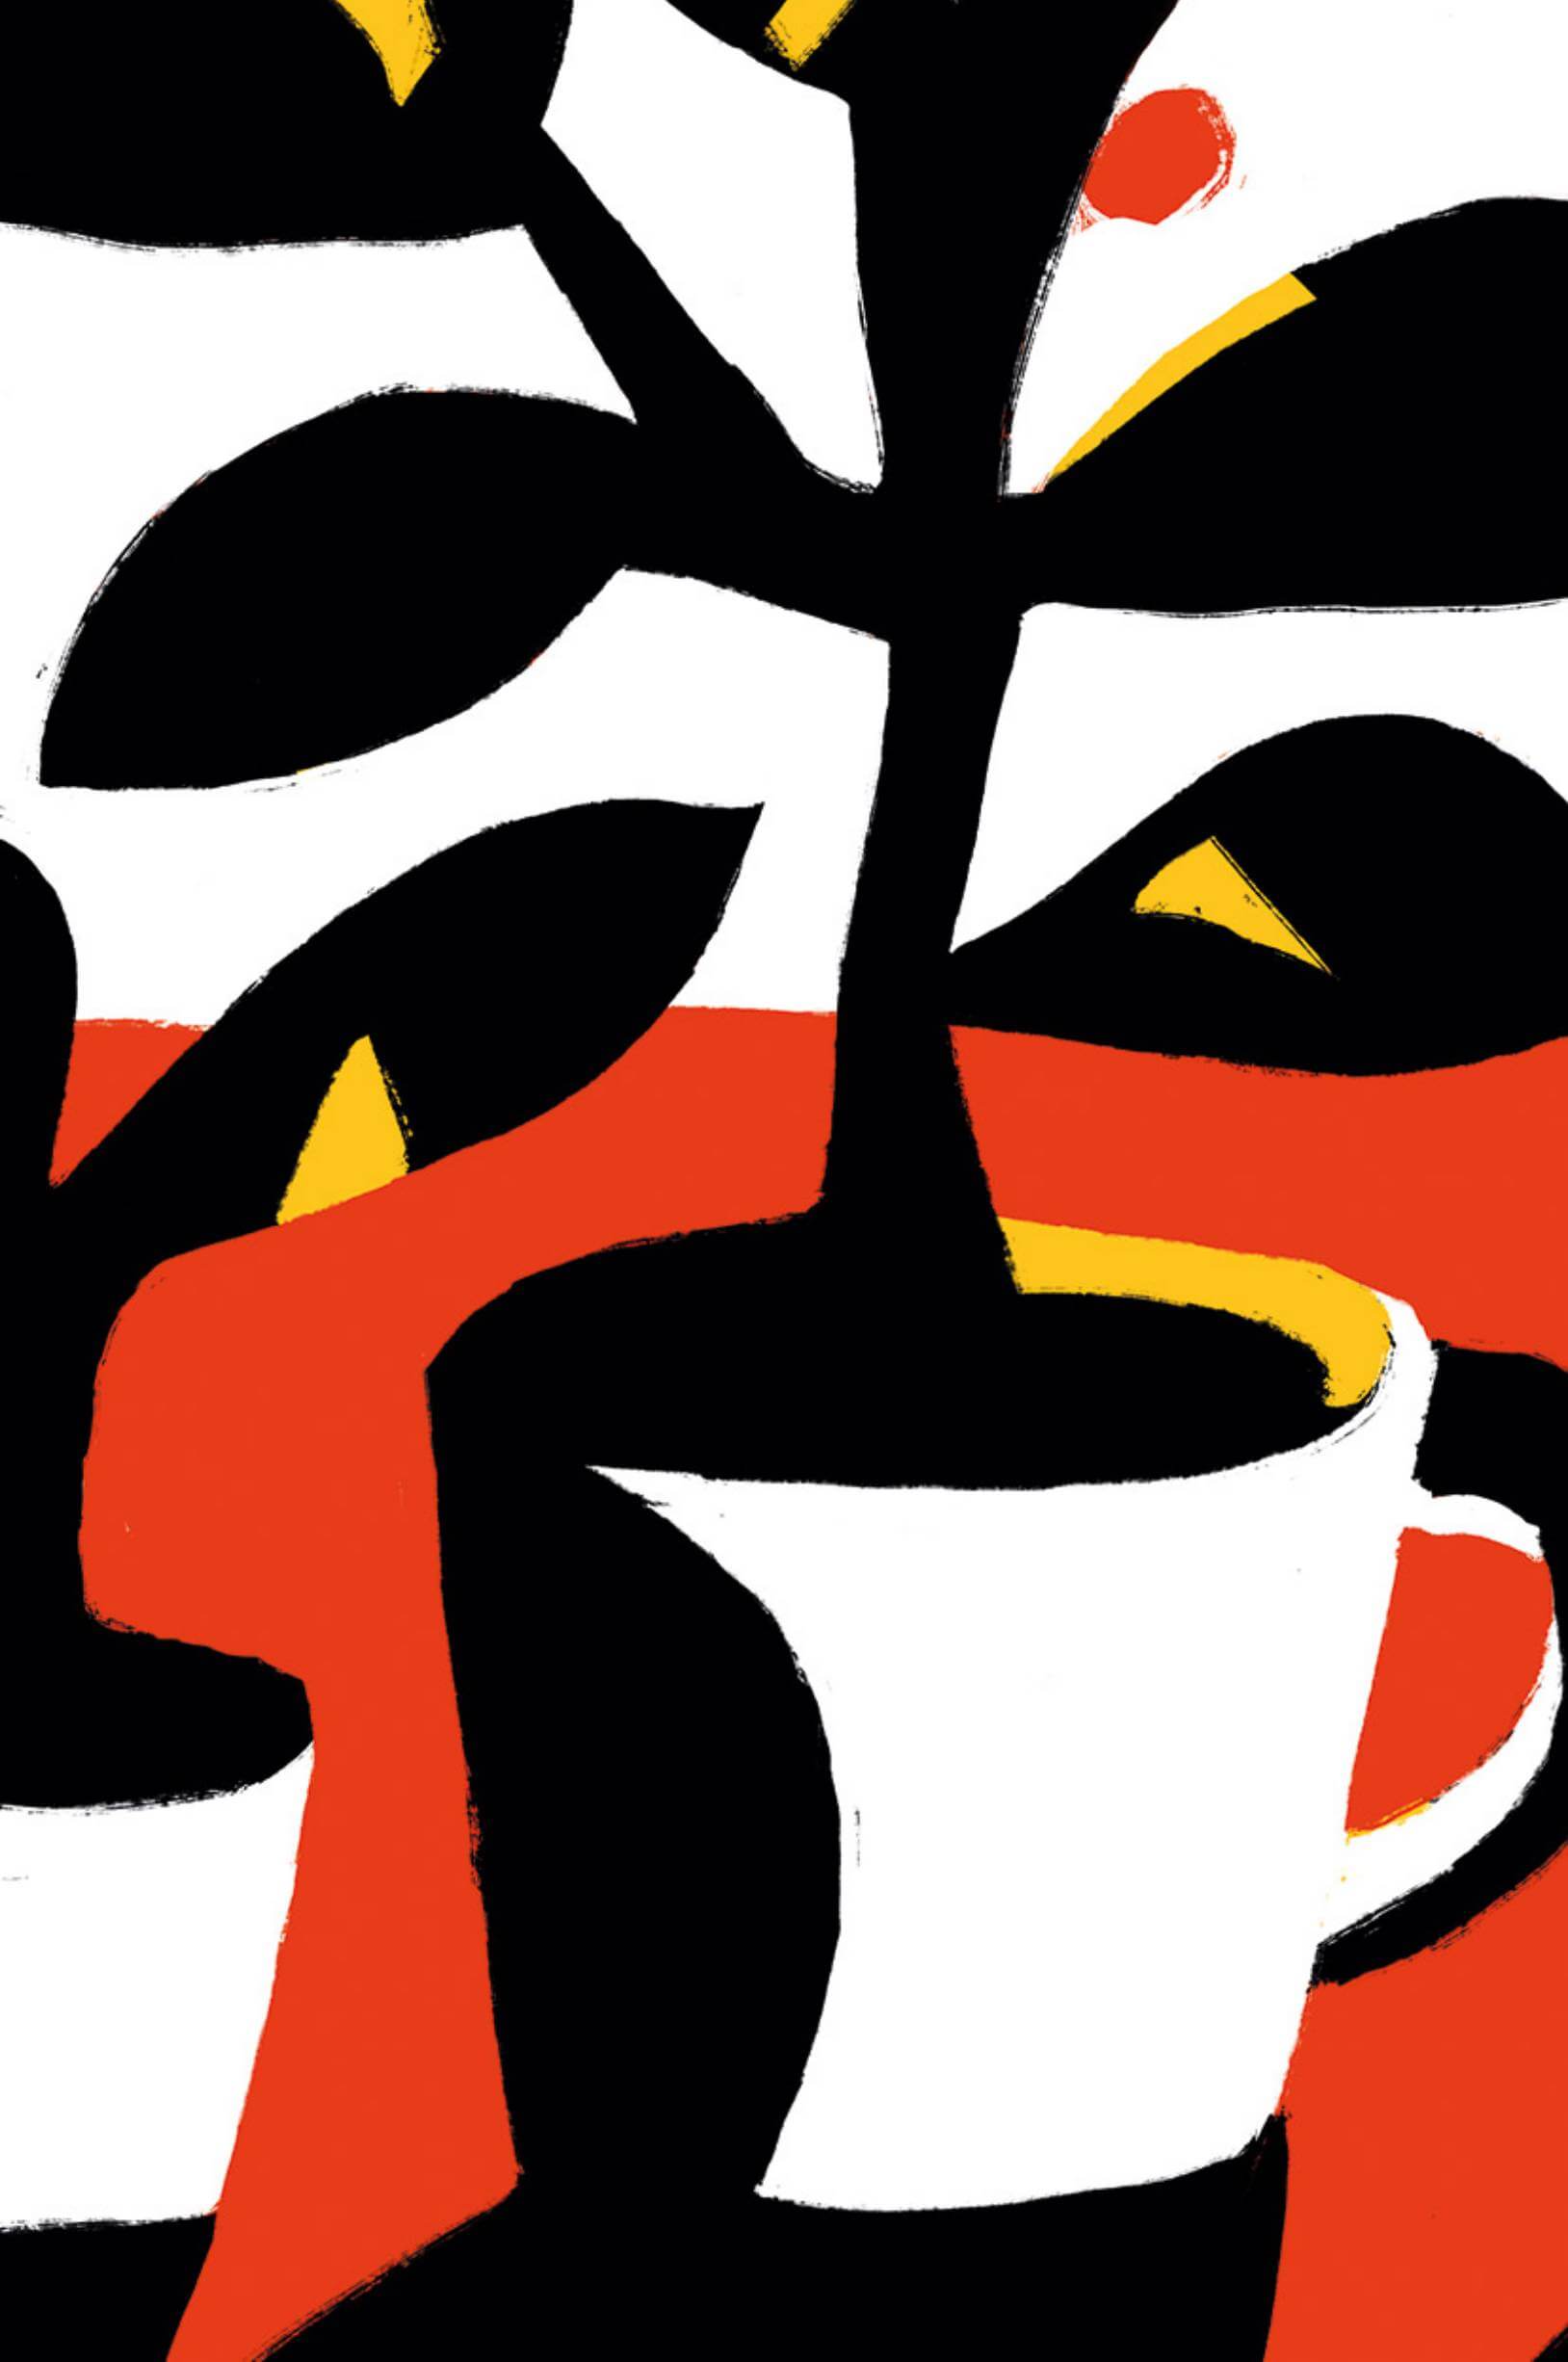 Painting of a coffee cup on a red and white background with coffee plant growing out it